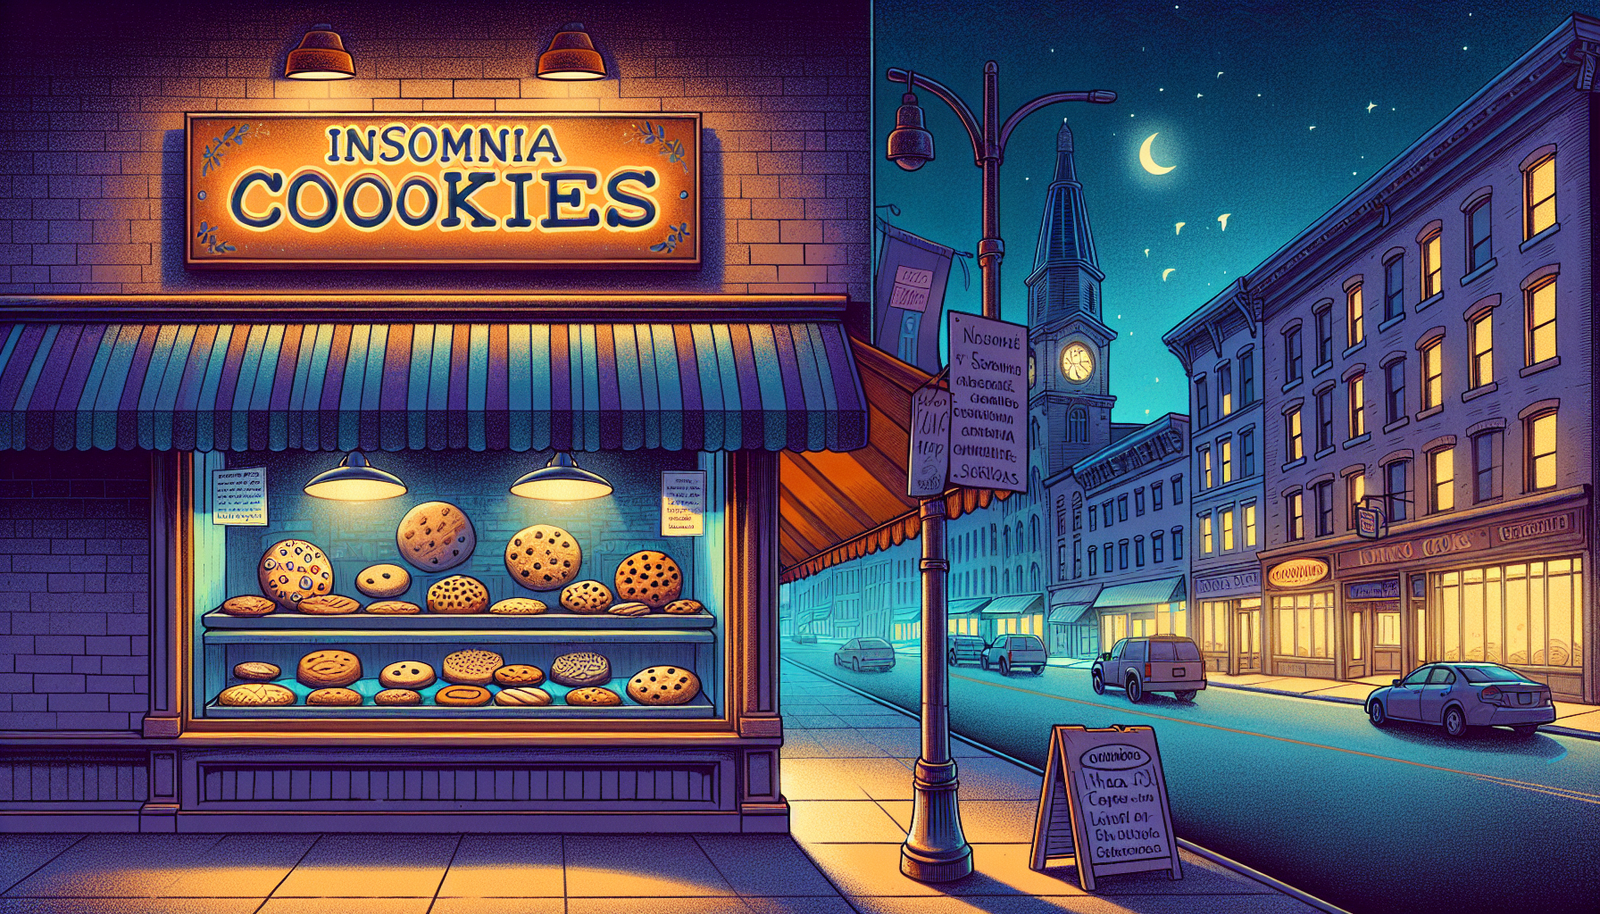 A Taste of America: Insomnia Cookies in Ithaca, NY